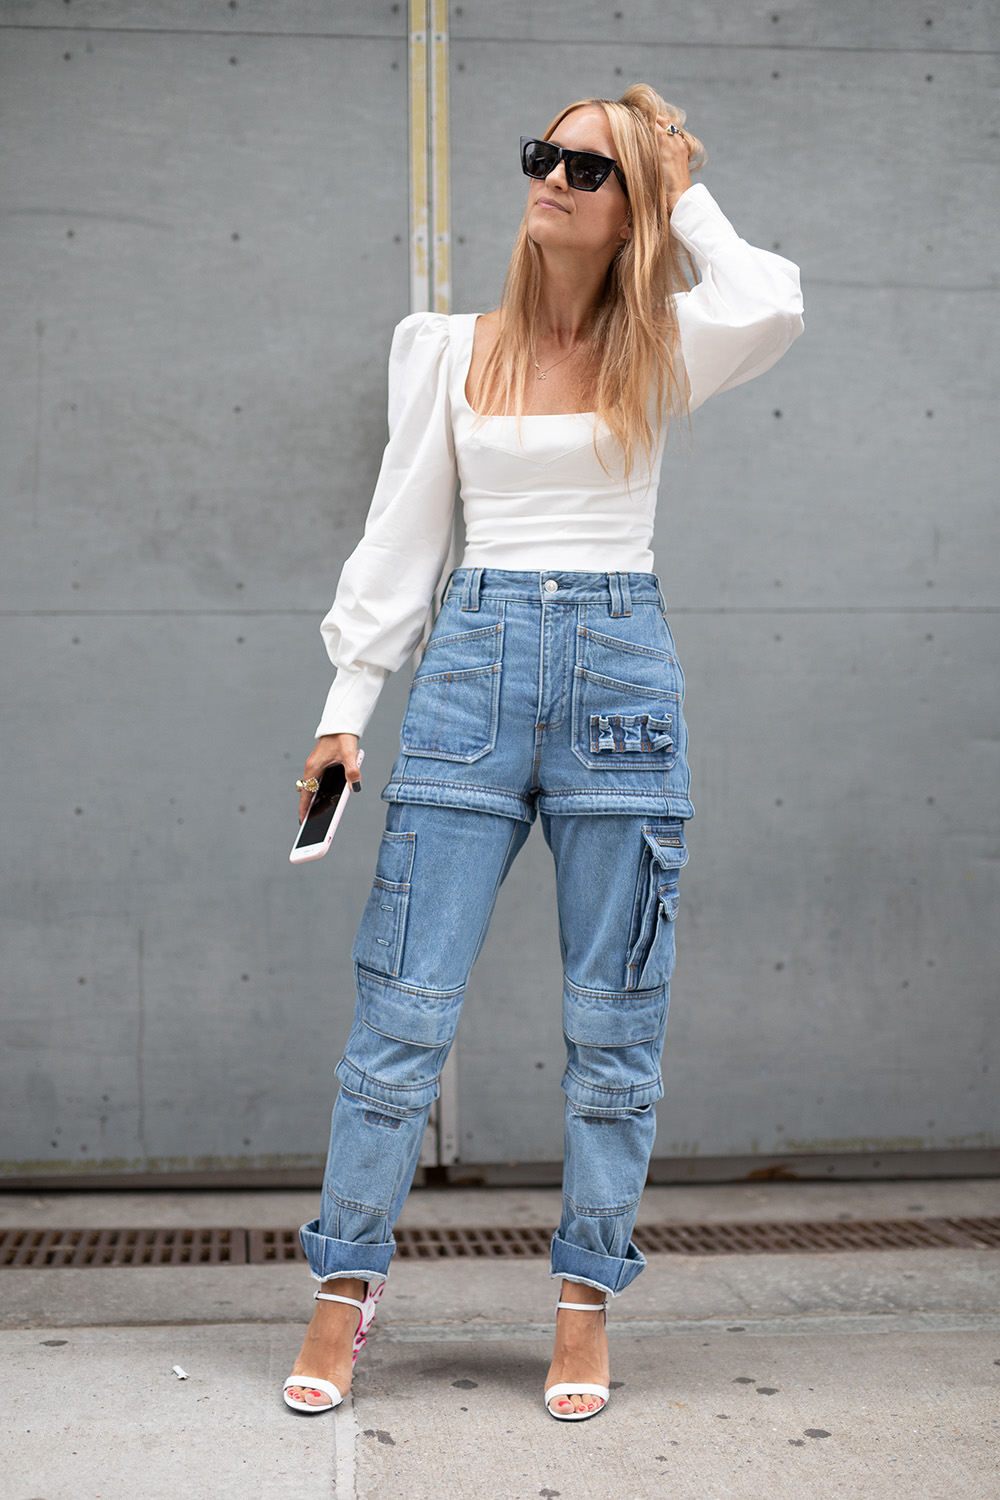 Precious Cargo: The practical pant trend that’s replacing your mom jeans (and fast) | NEW YORK, NY - SEPTEMBER 07: A guest is seen on the street during New York Fashion Week SS19 wearing white shirt with washed blue denim cargo pants on September 7, 2018 in New York City. (Photo by Matthew Sperzel/Getty Images)